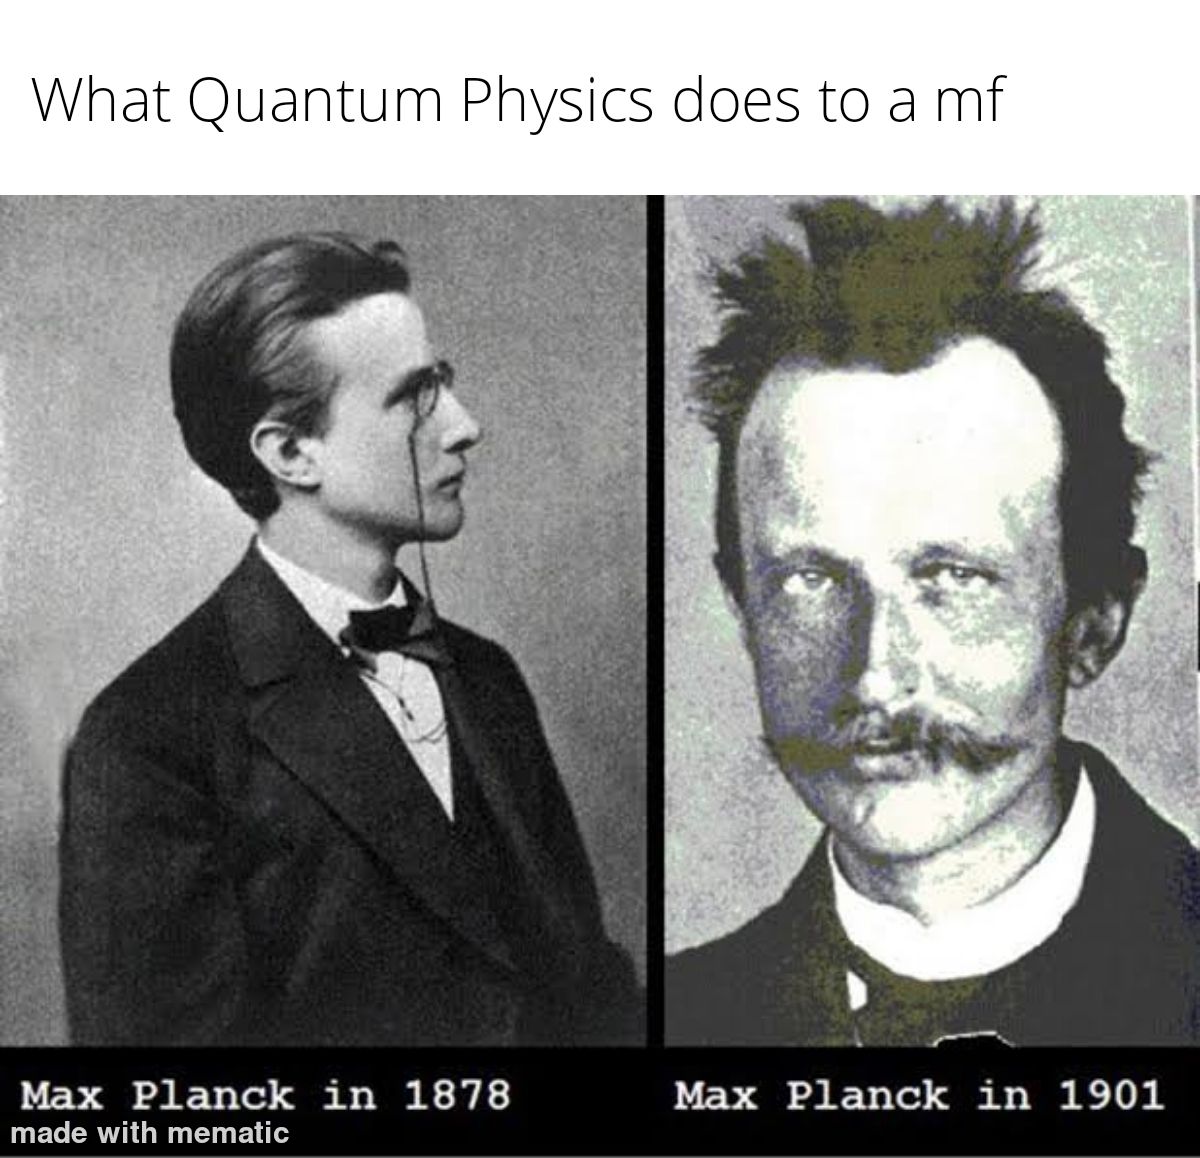 Max Planck was one of the founders of Quantum Physics